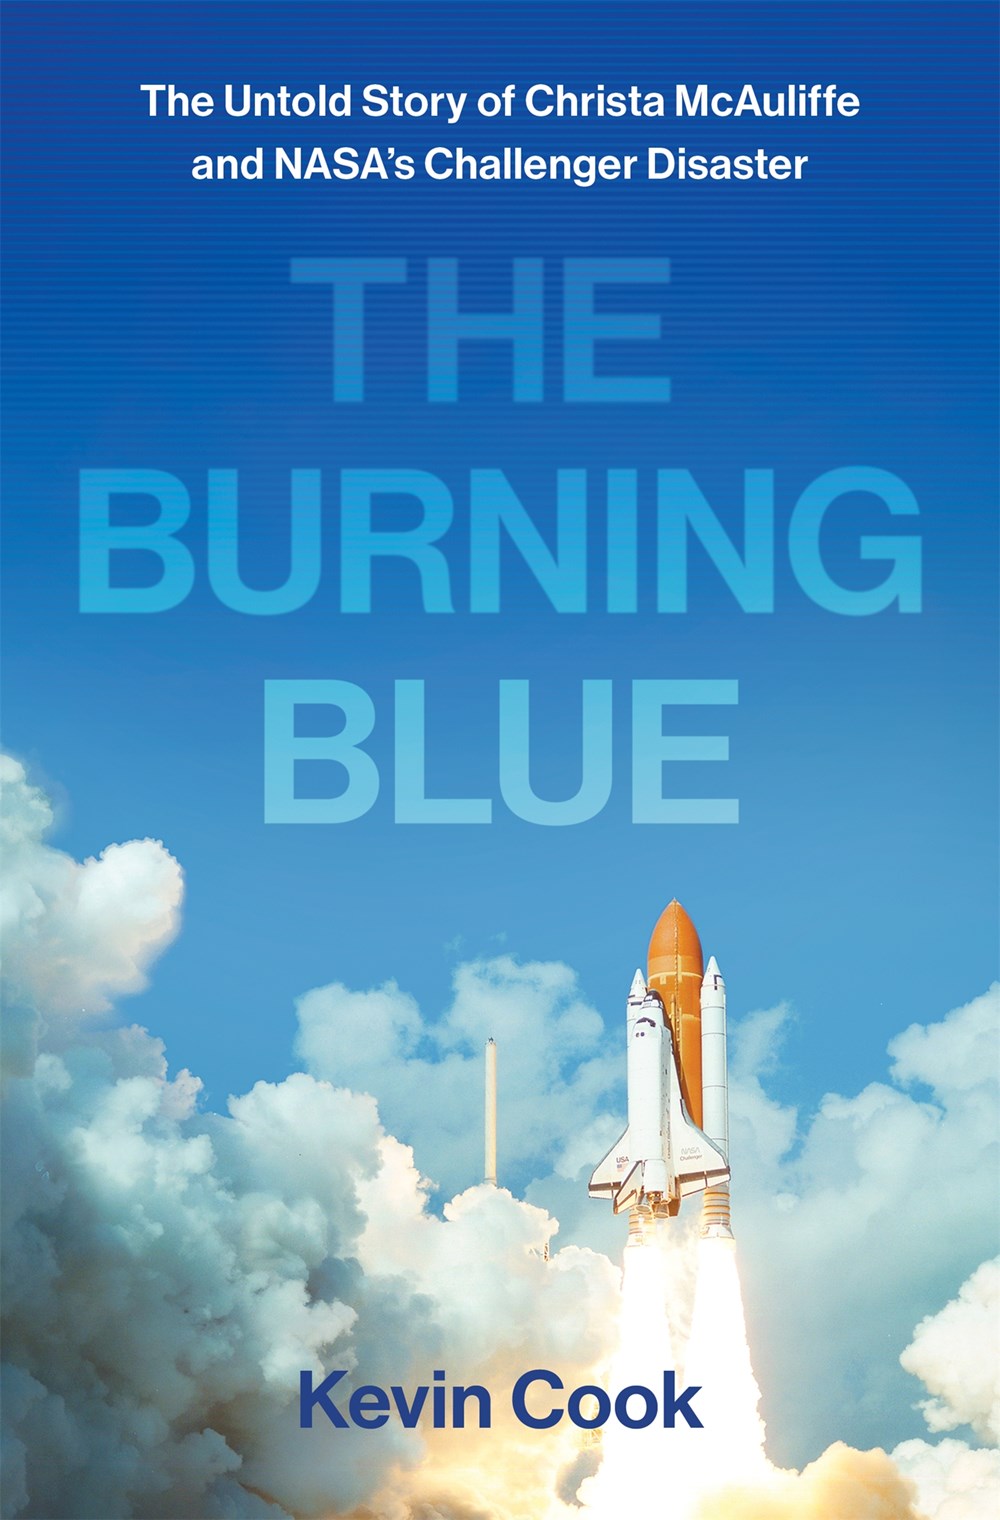 The Burning Blue By Kevin Cook